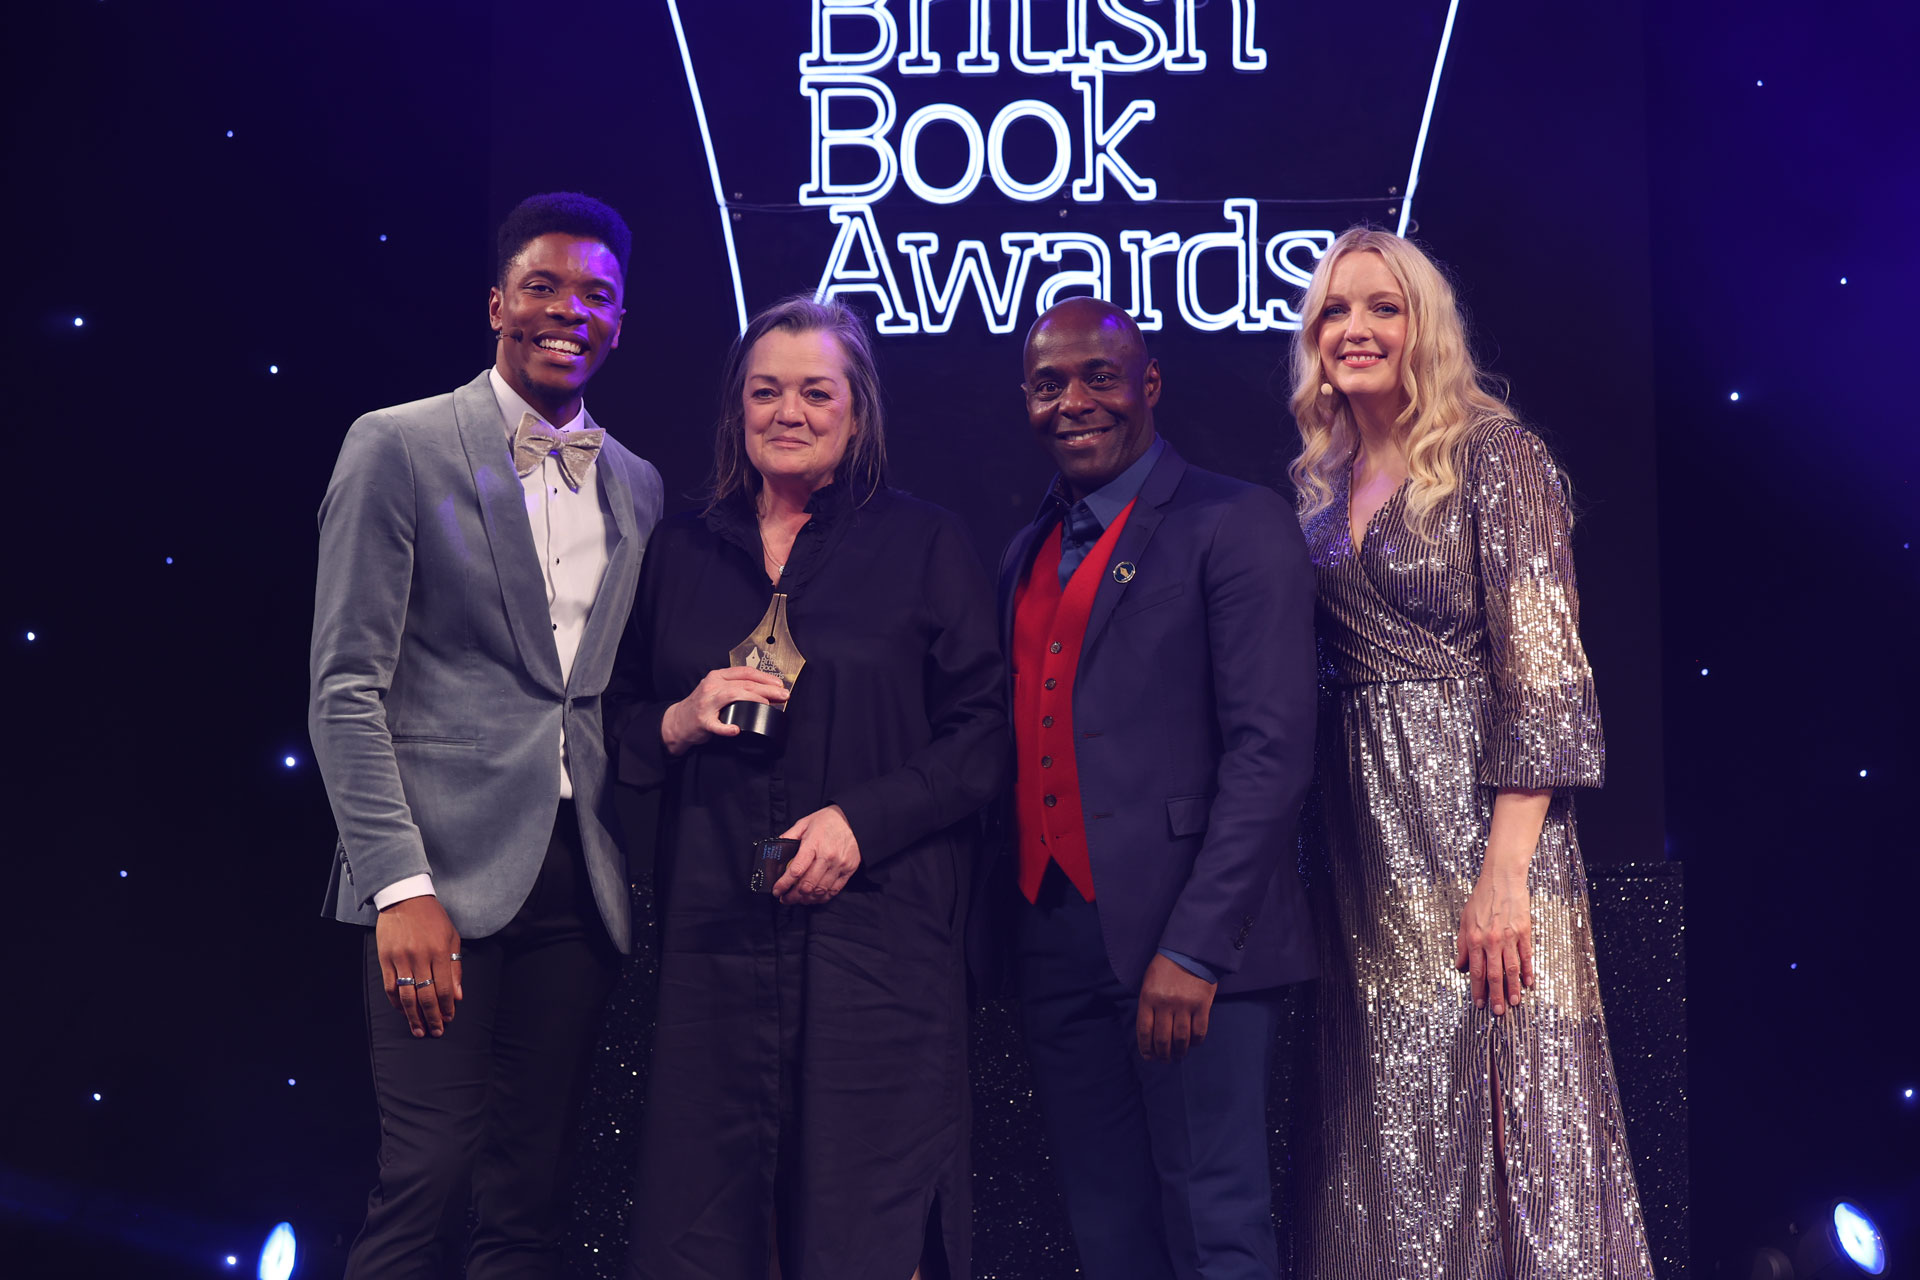 EDITORIAL USE ONLY Rhys Stephenson, Louise Kennedy, Paterson Joseph, Lauren Laverne at The British Book Awards 2023 ceremony. Photo: British Book Awards